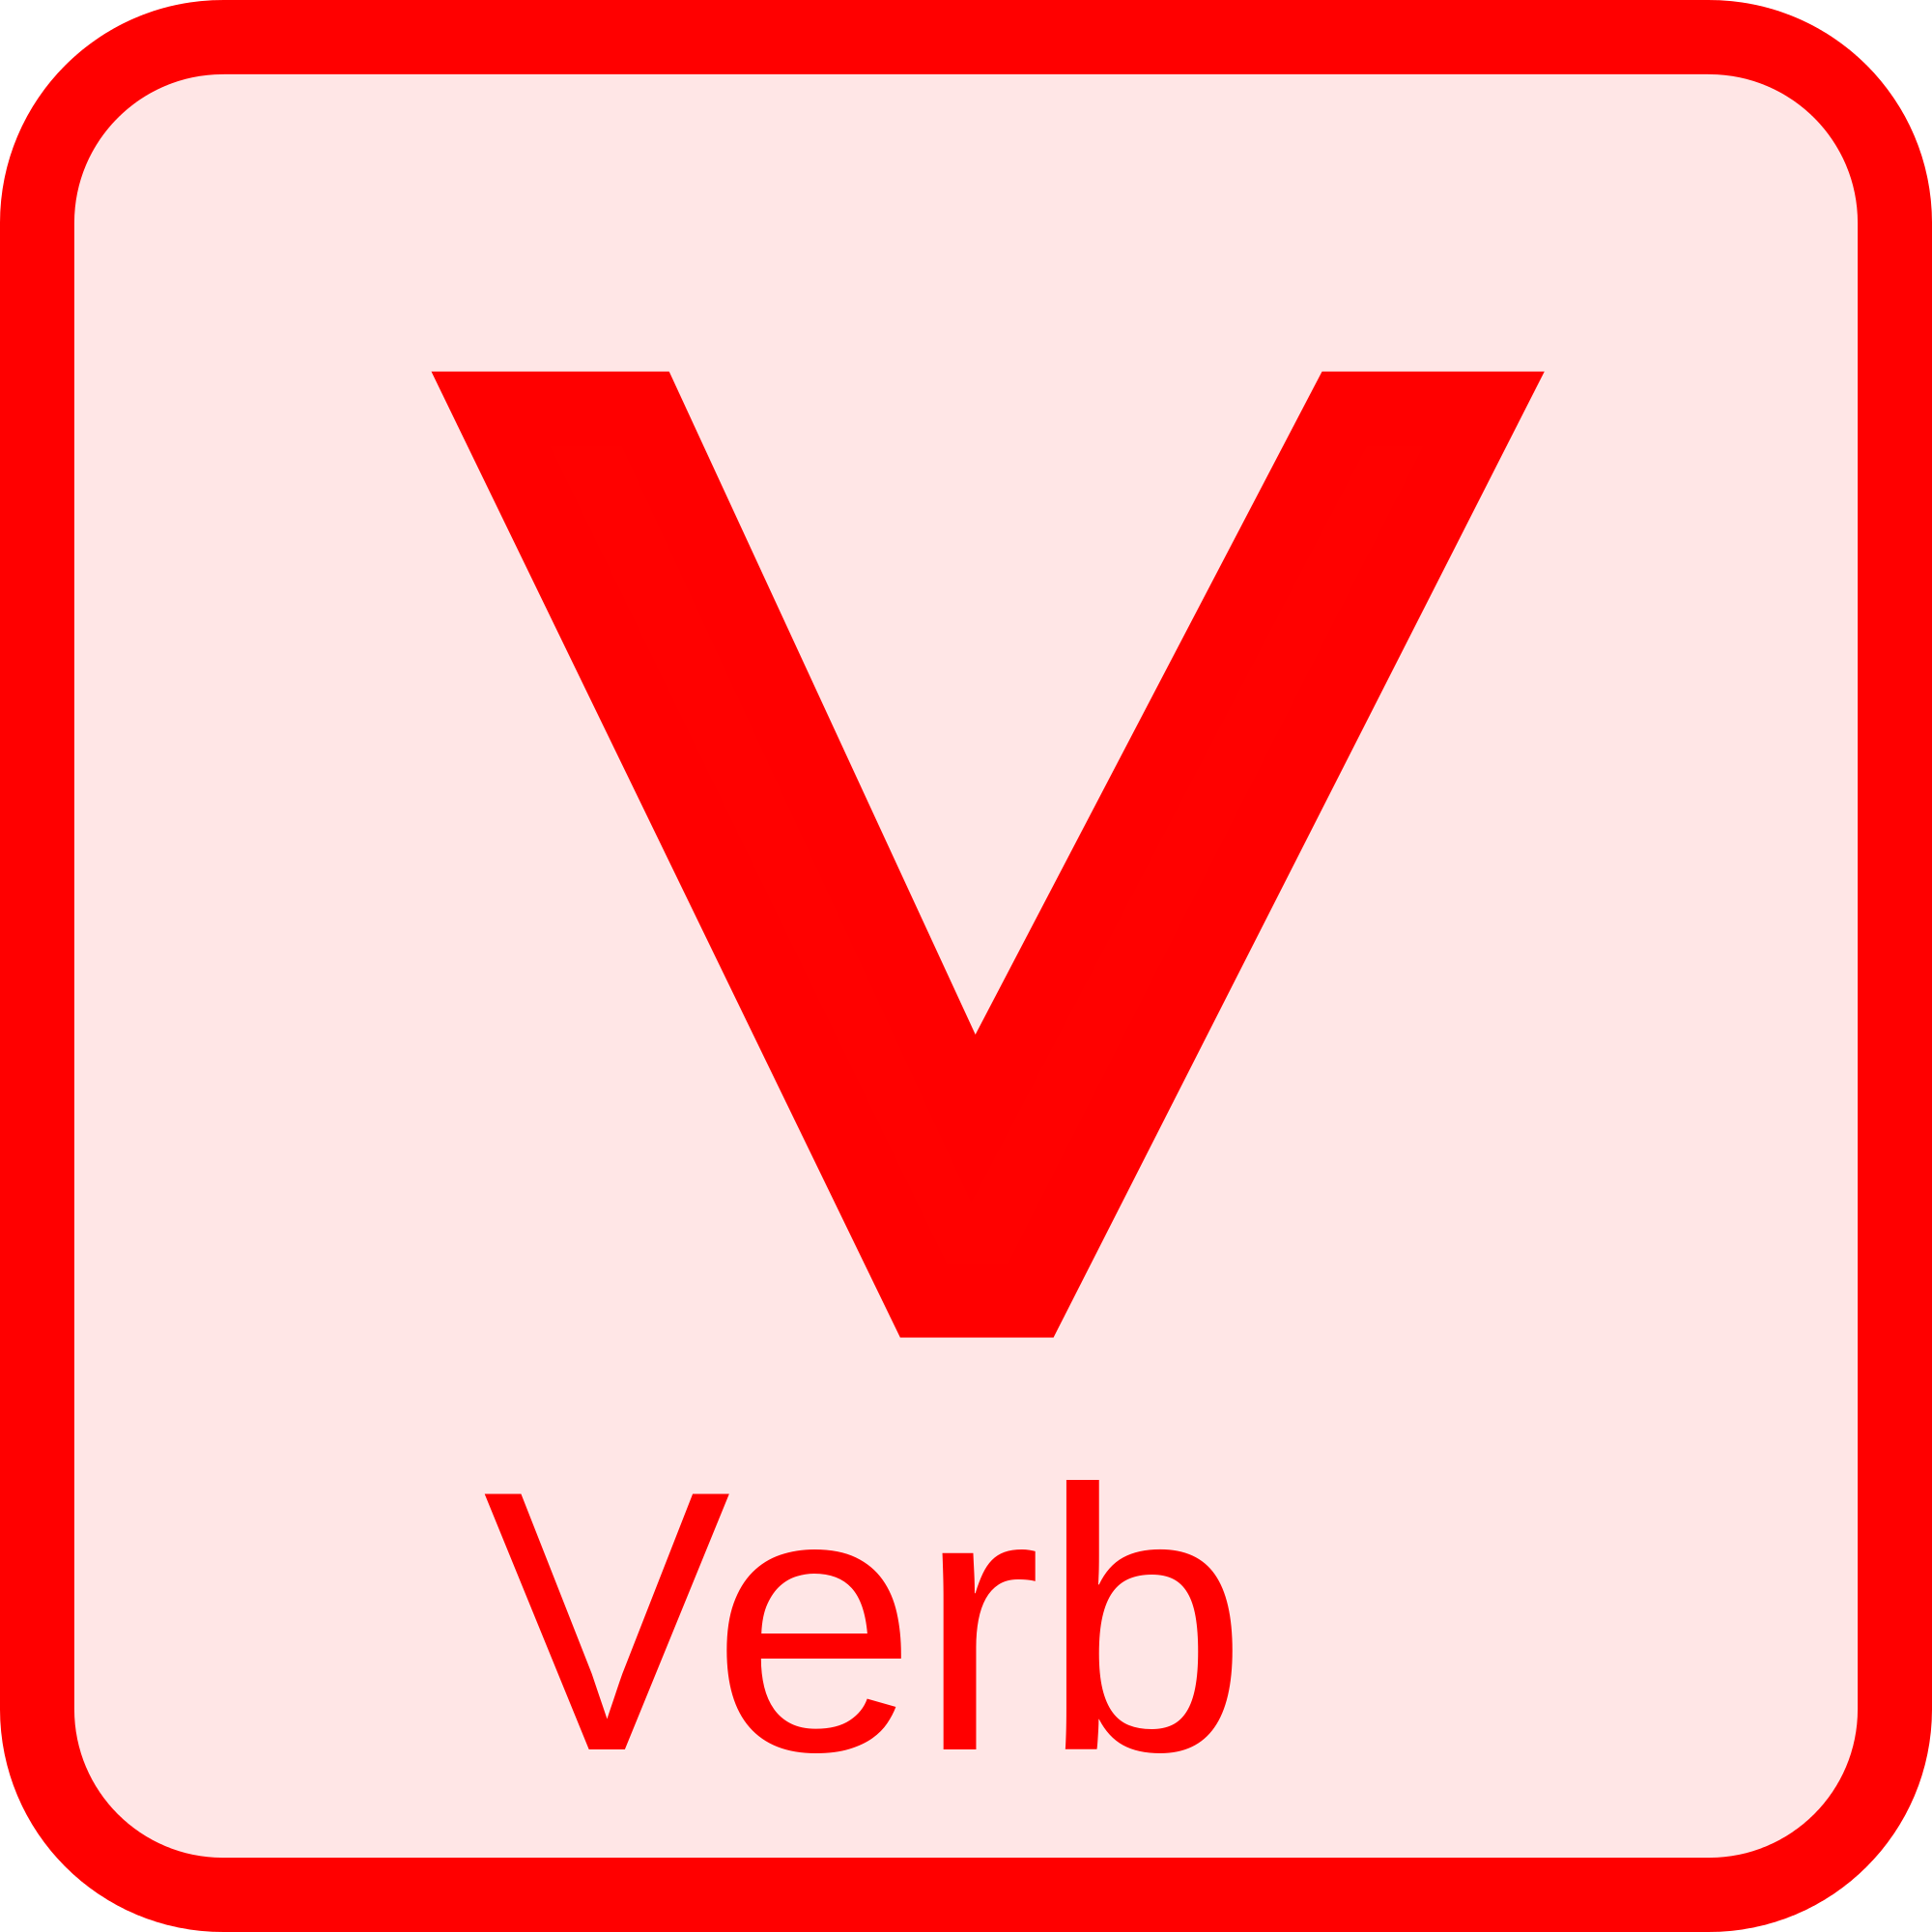 Verb Tense Questions for GMAT